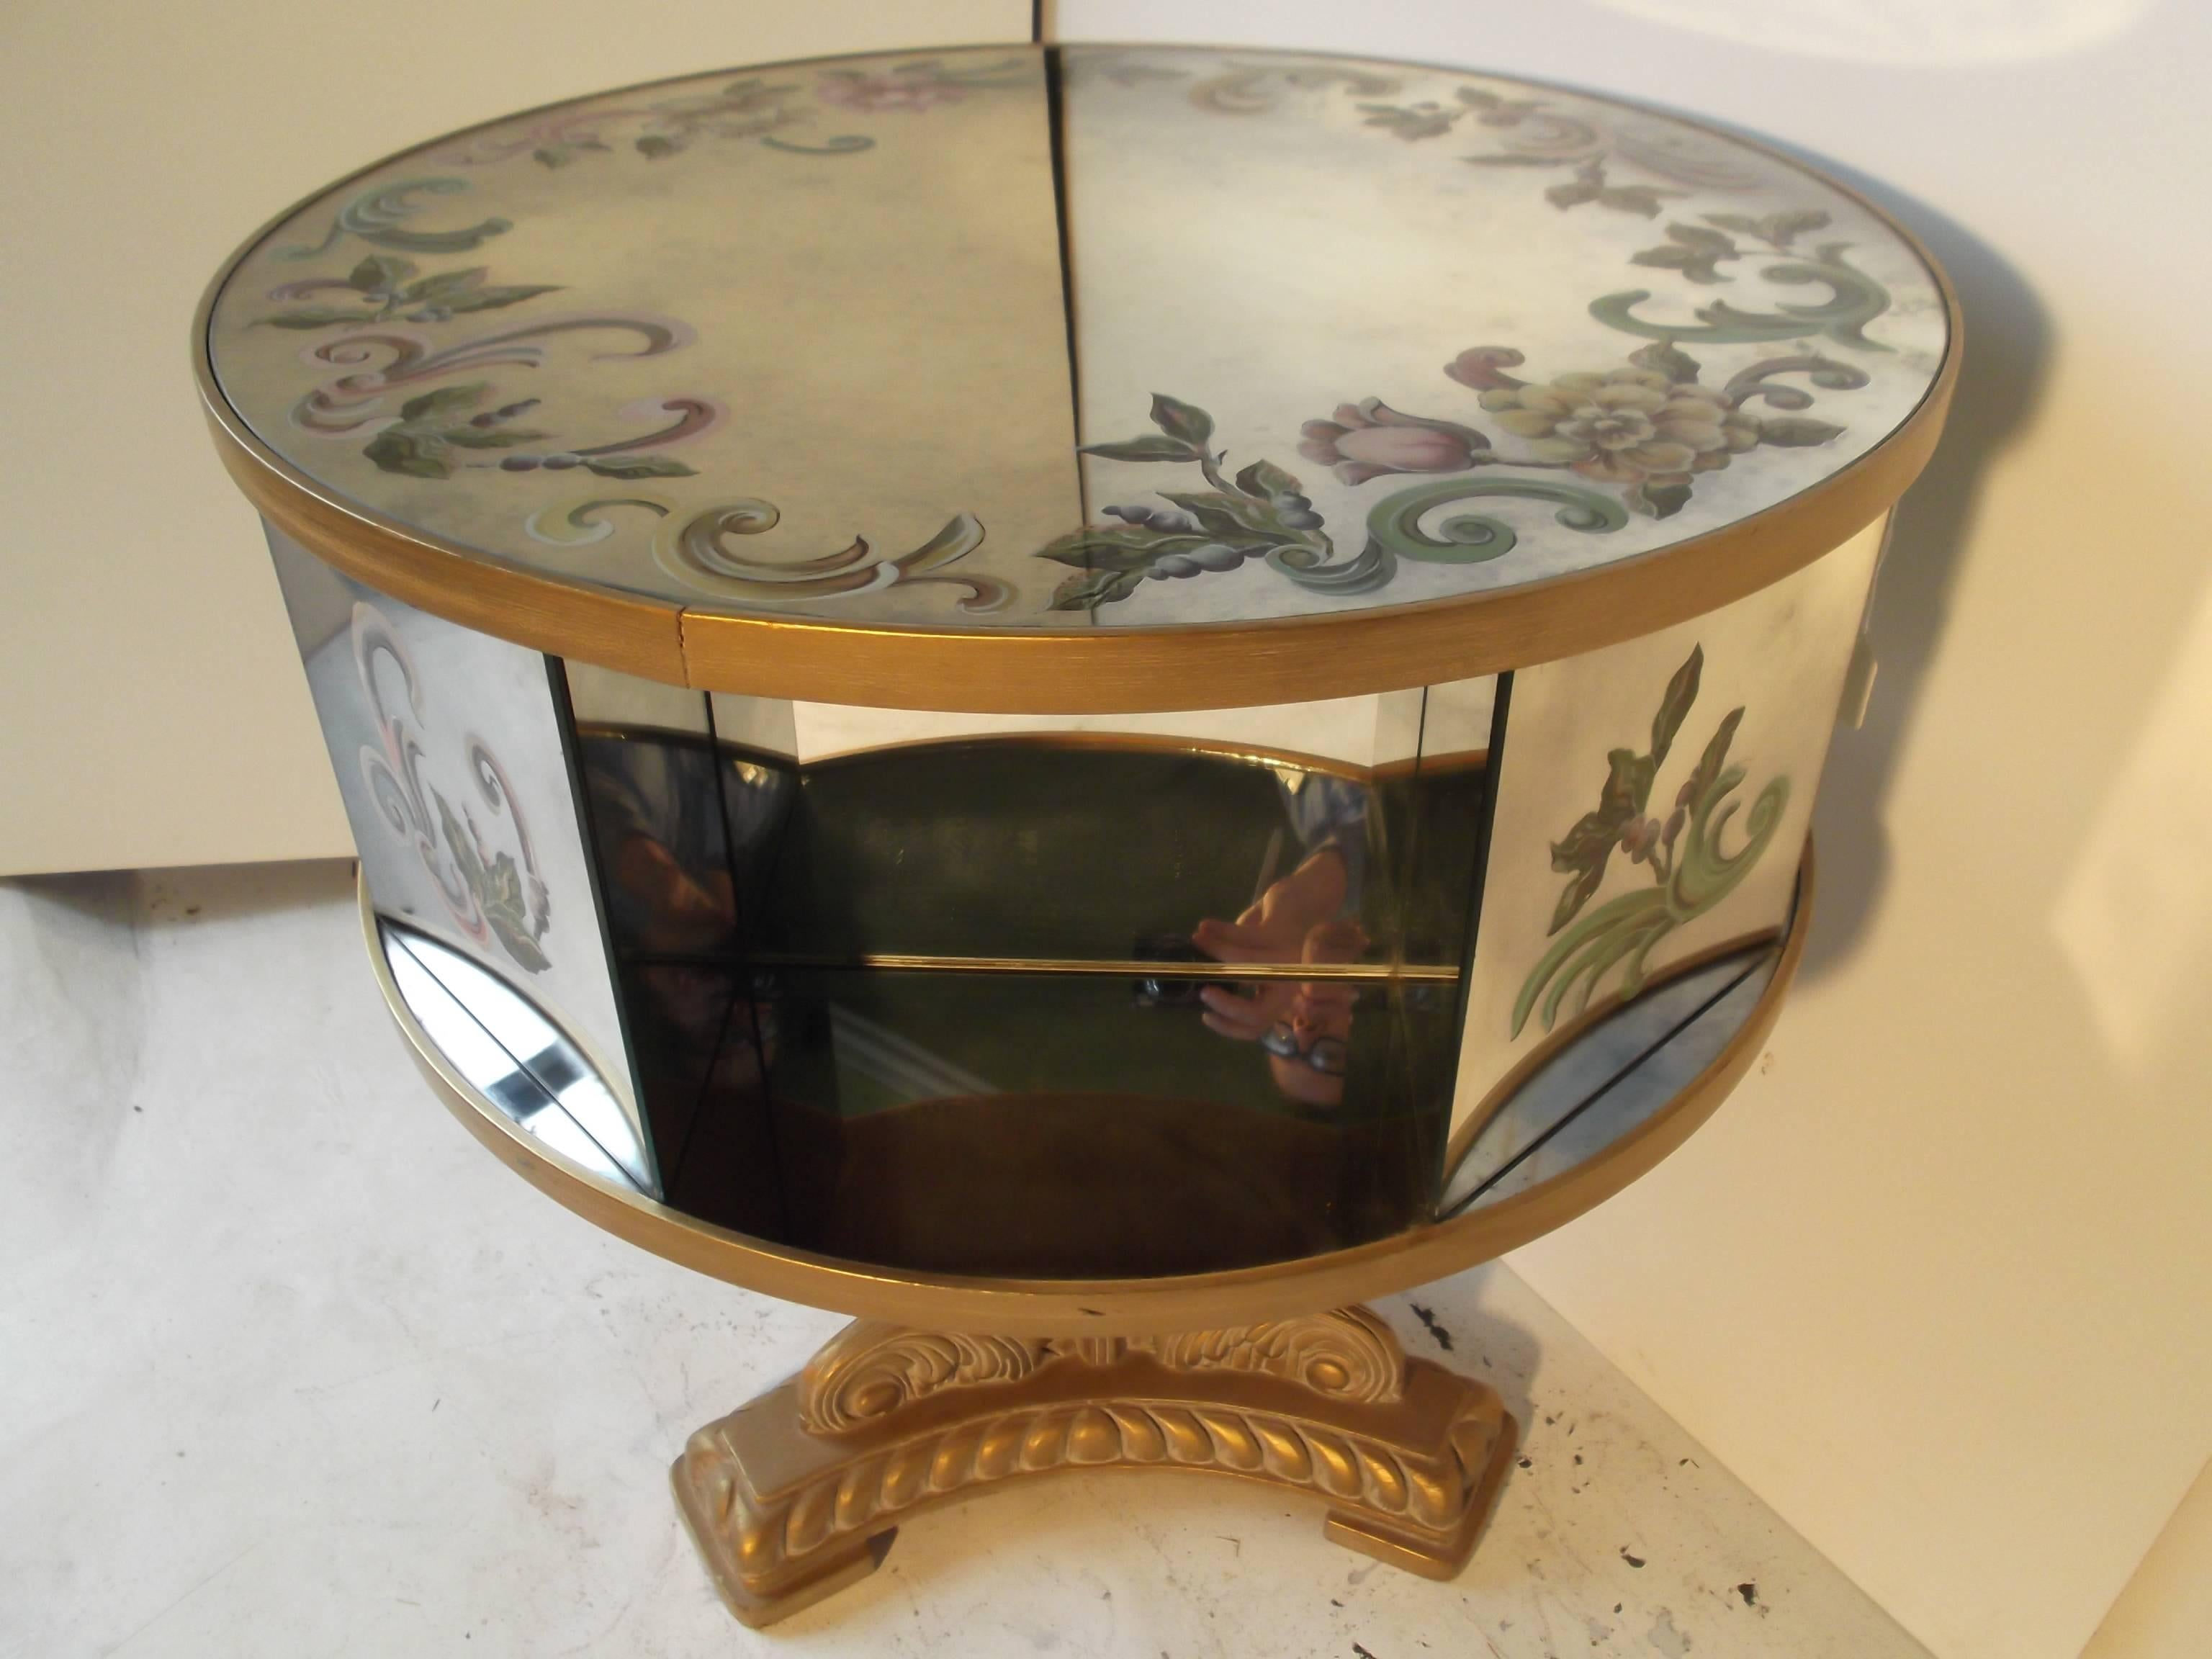 This is a wonderful vintage rotating drum table. It has beautiful reverse painted foliage to top and four side panels. The mirror is purposefully clouded around the paint detail. The base is carved wood, painted good, with leaves and rope like edge.